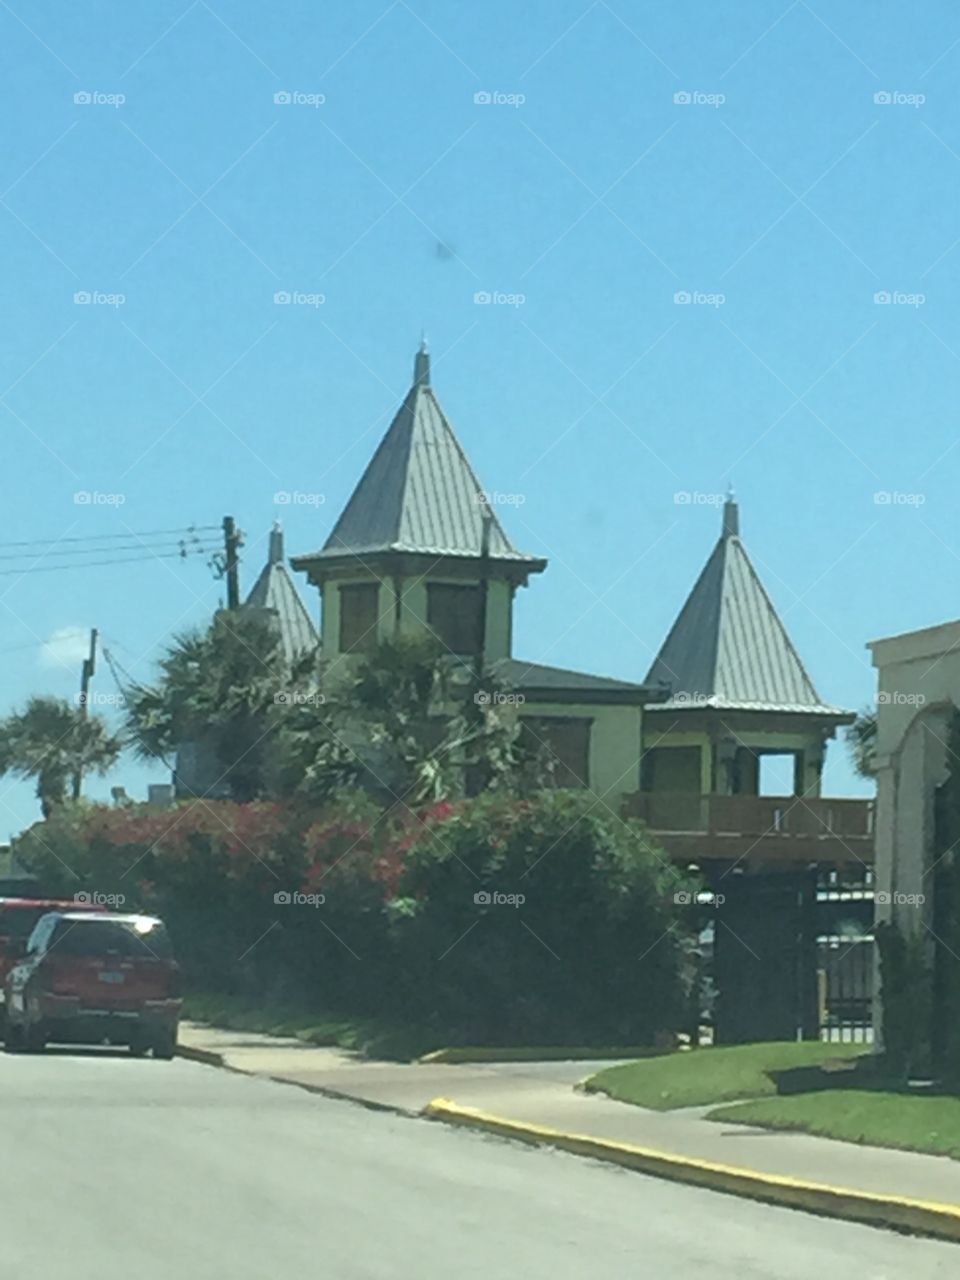 Another house in Galveston 